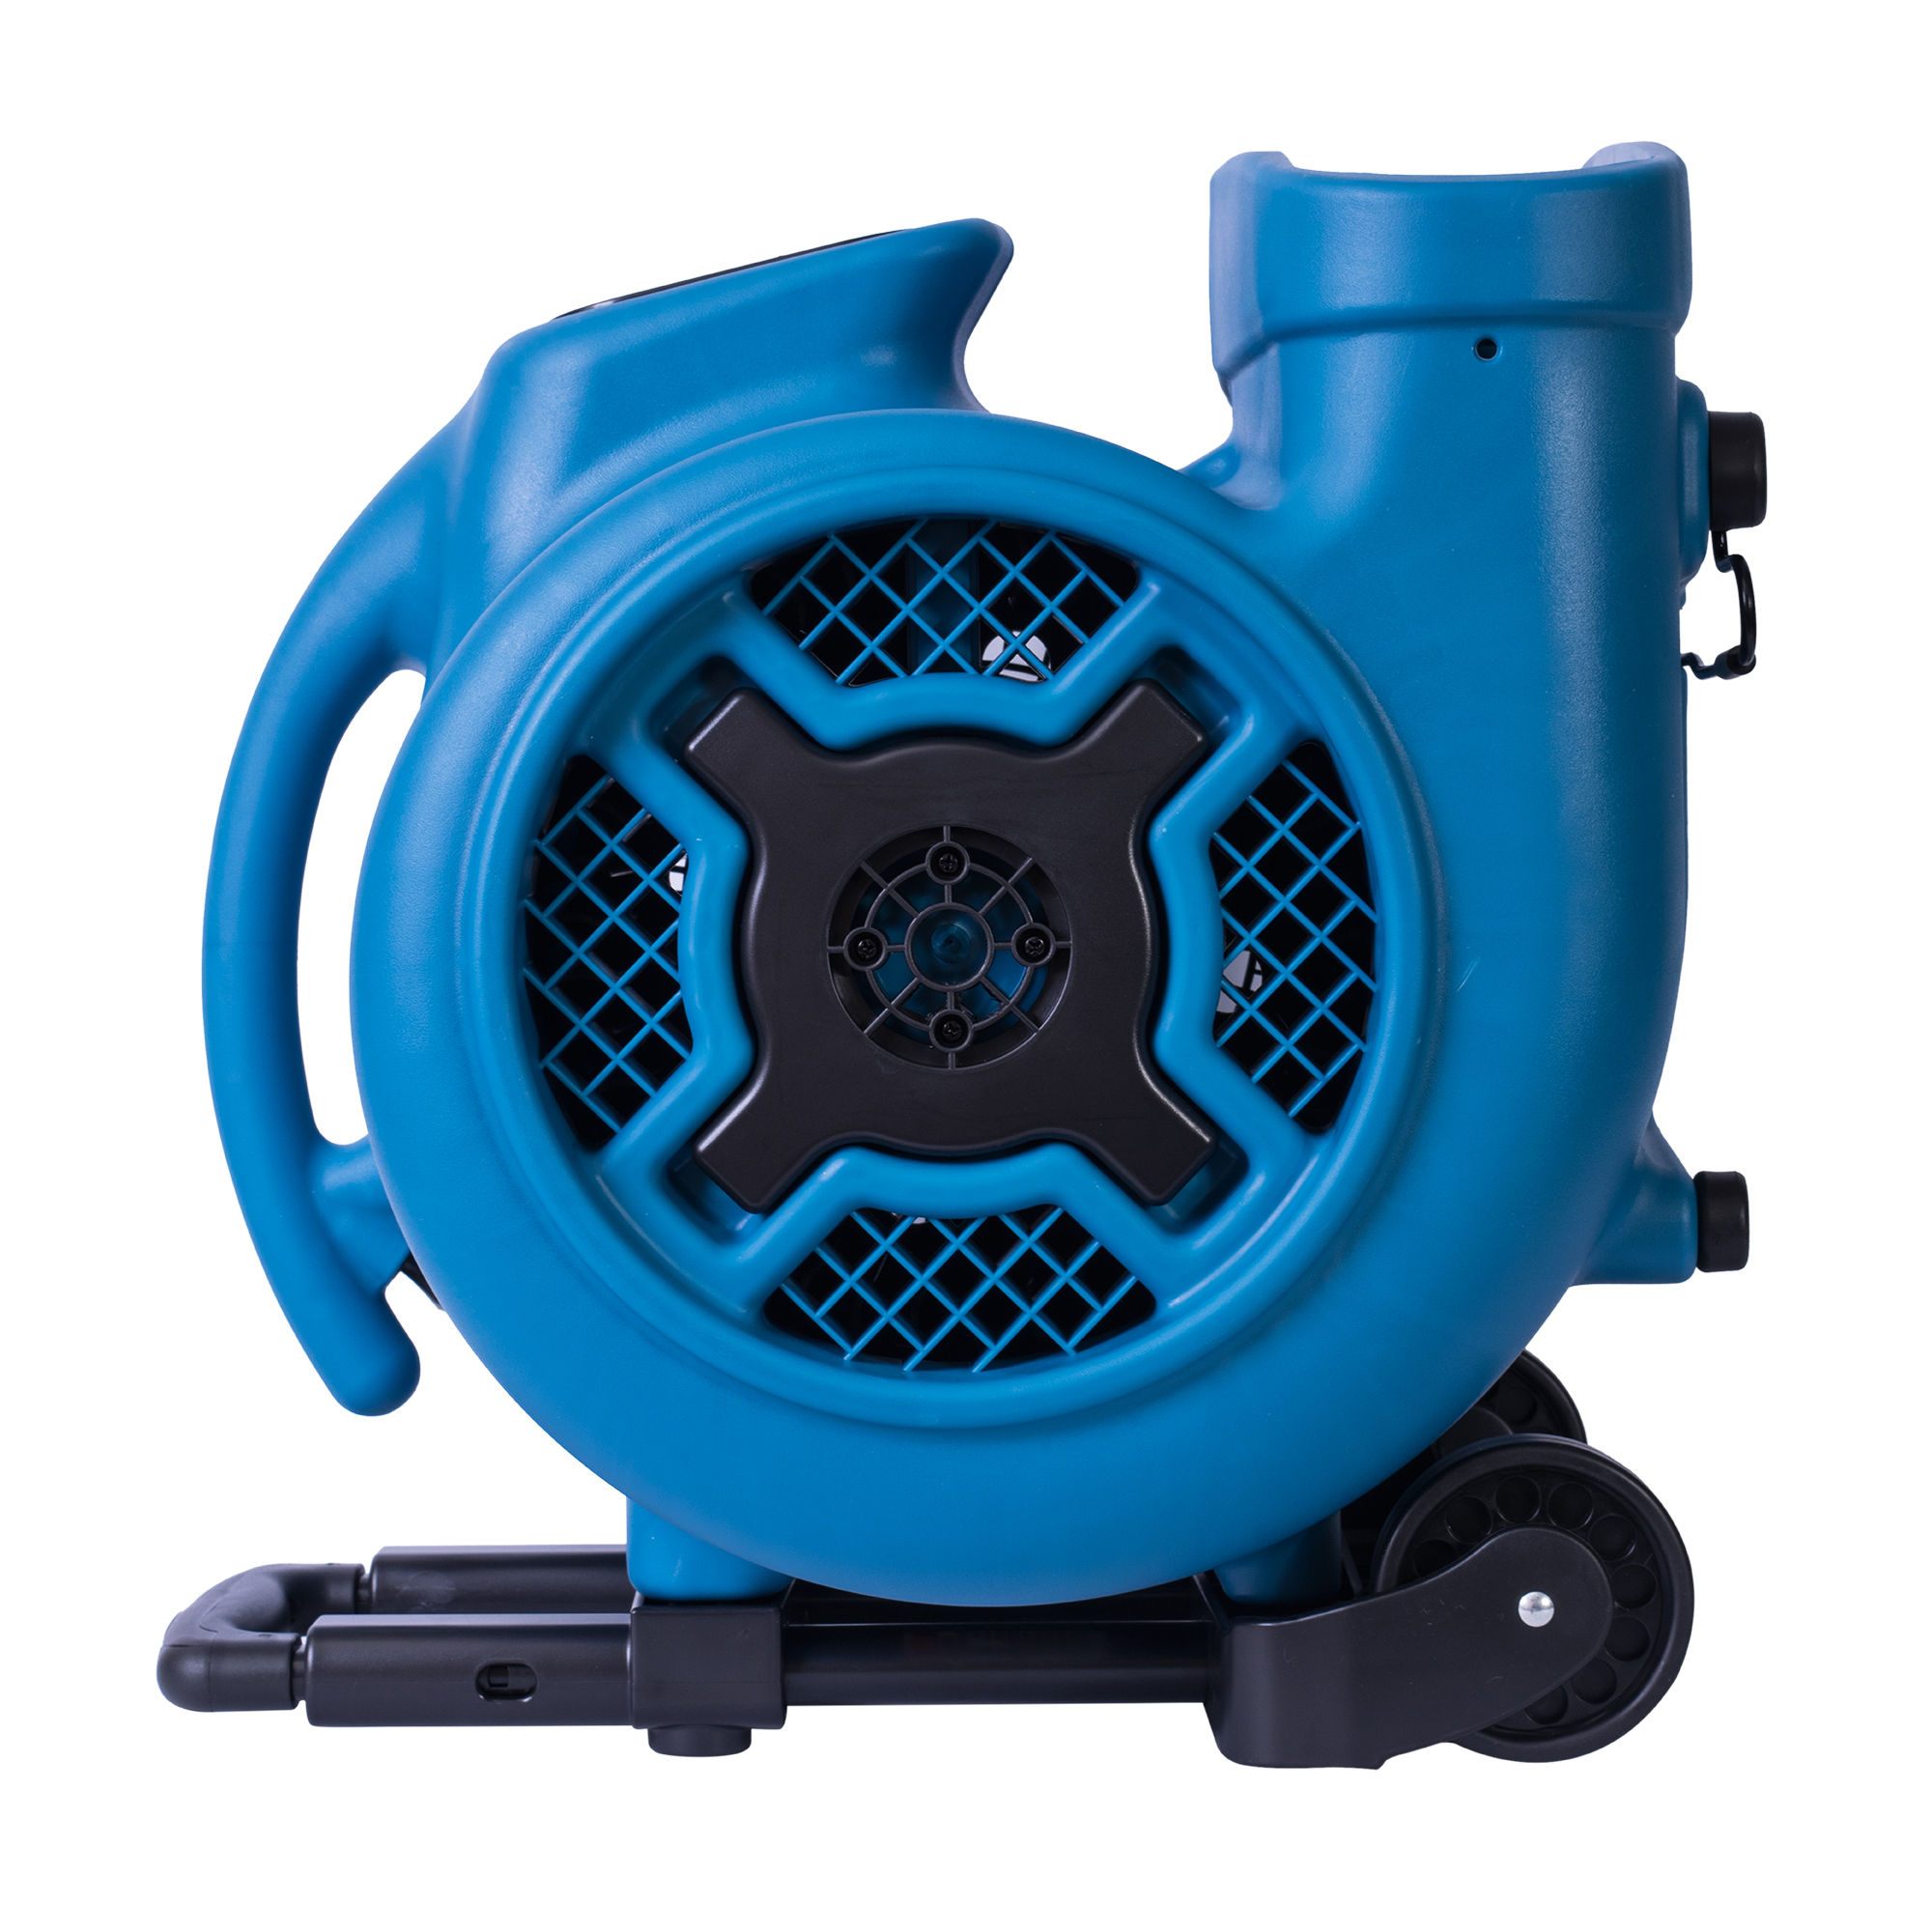 Centrifugal Air Mover Carpet Dryer Floor Fan for Water Damage